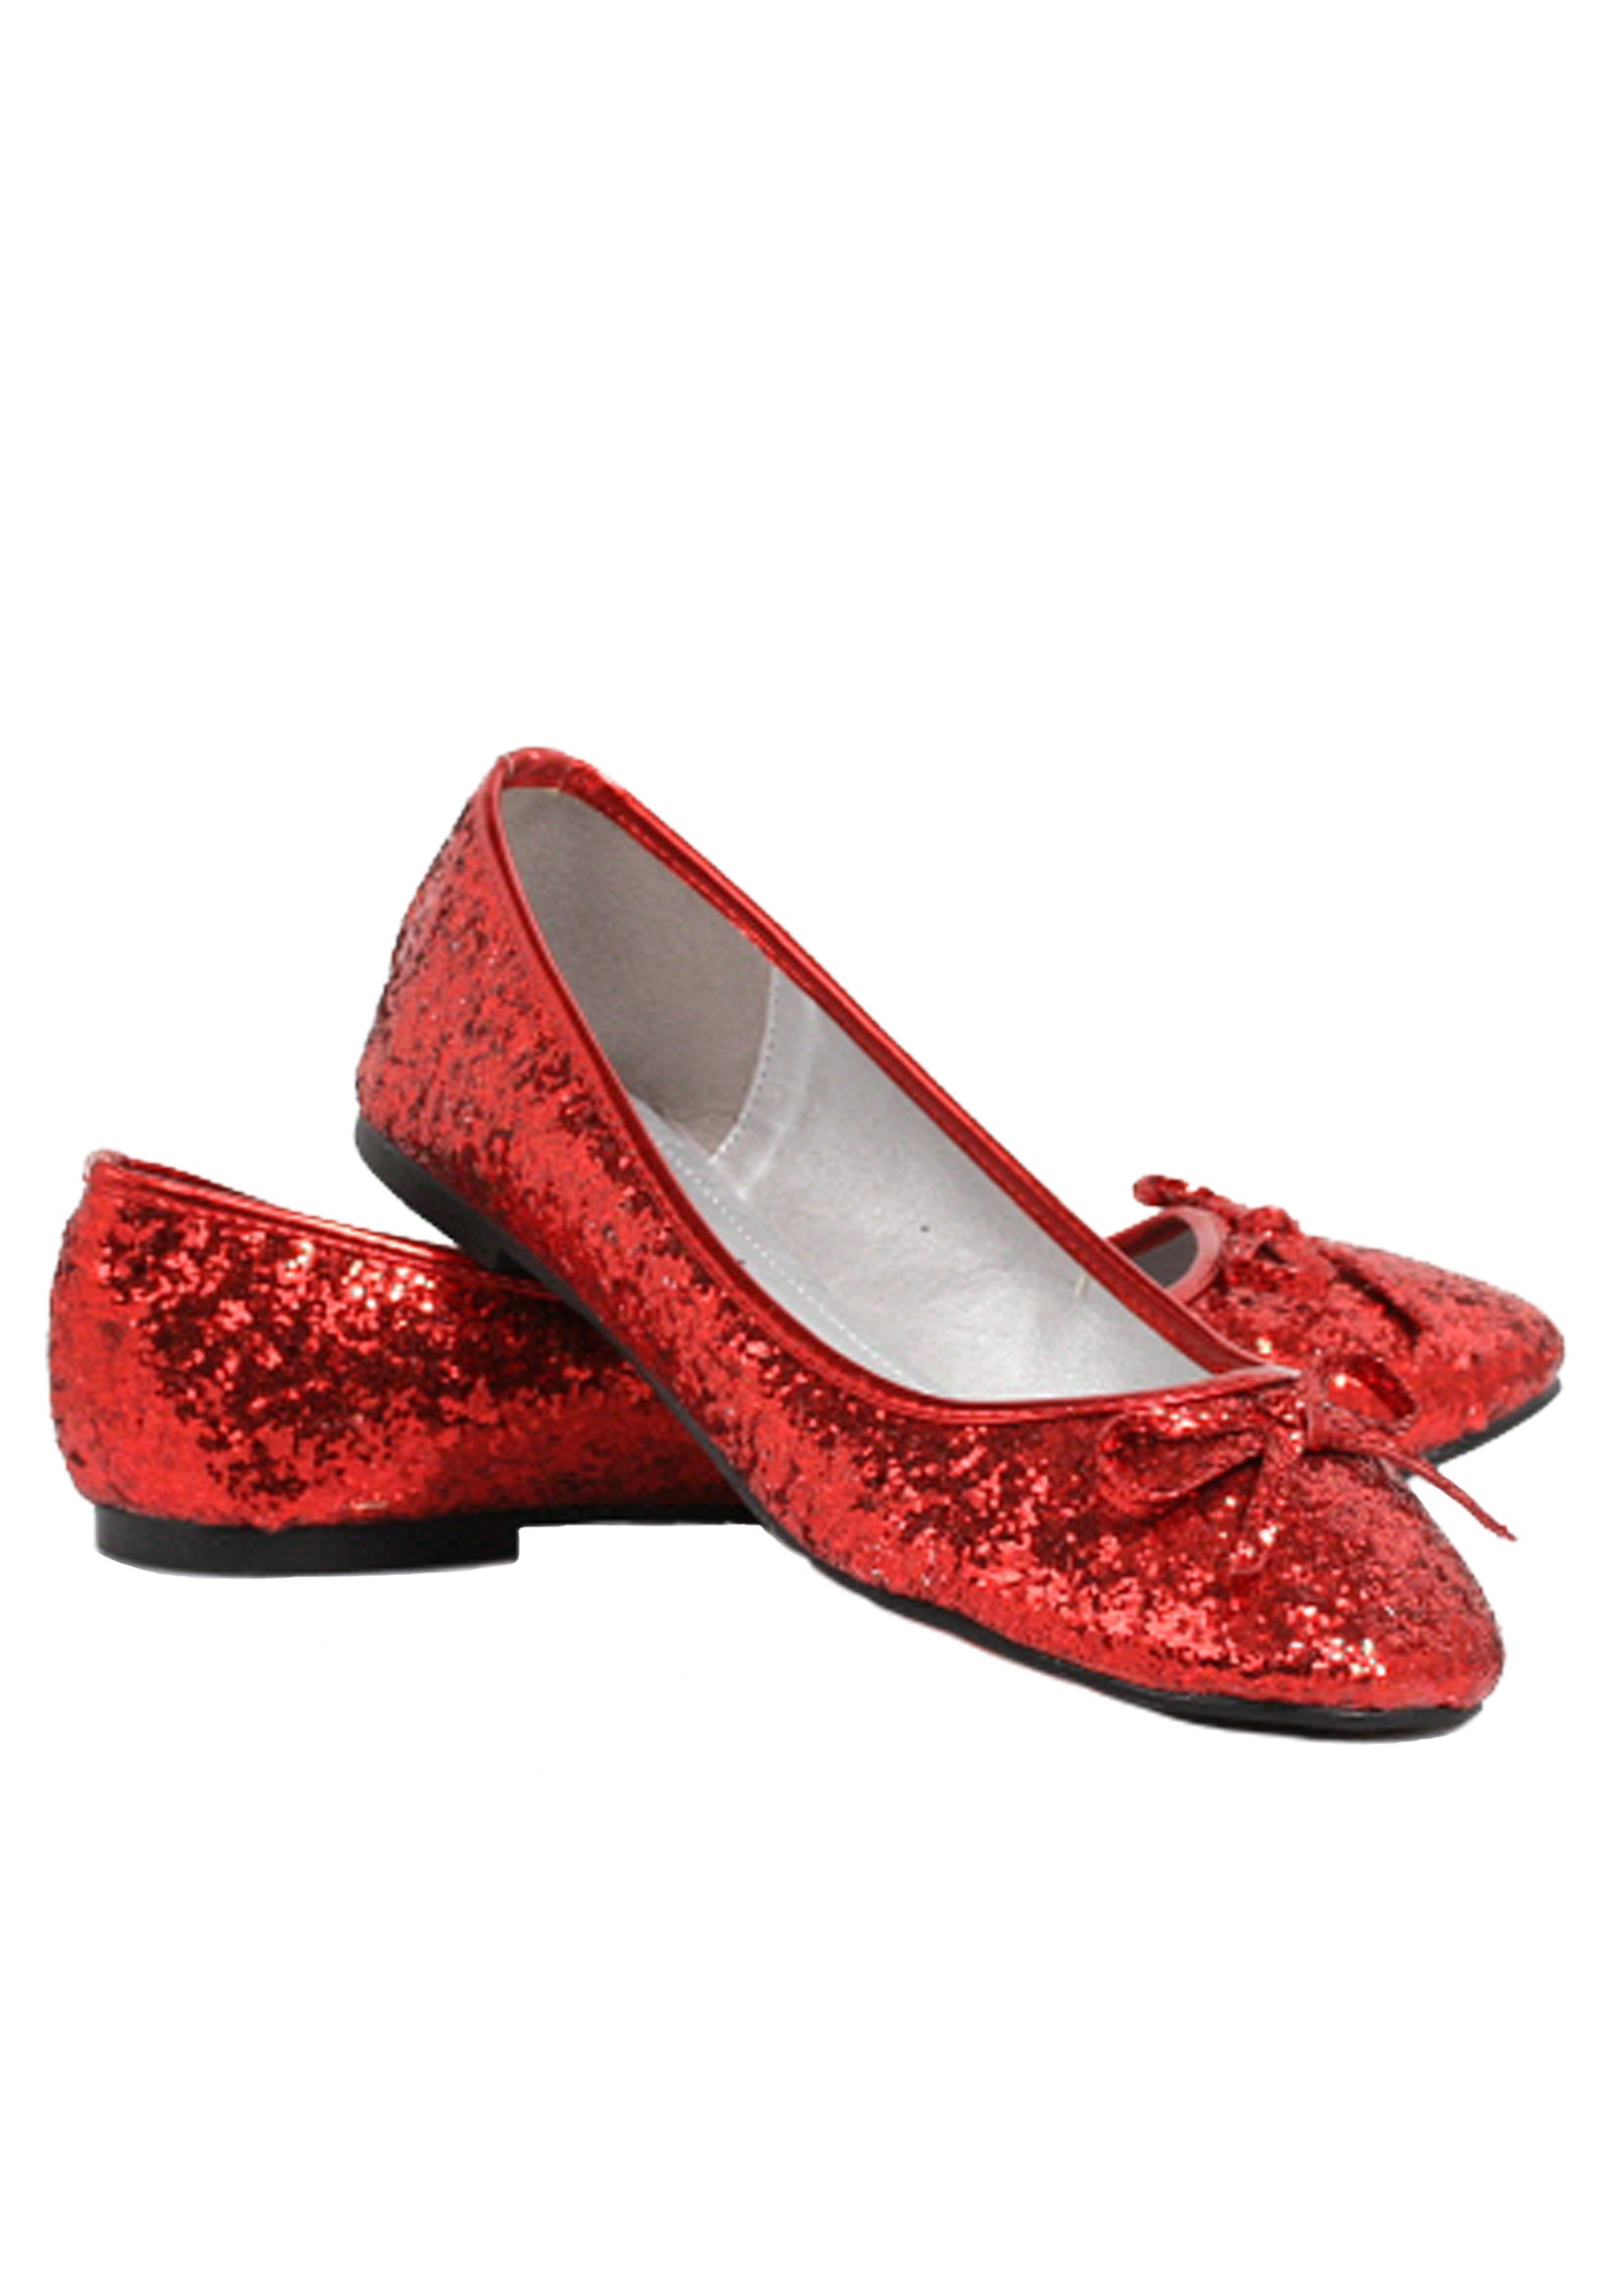 Red Glitter Flats | Red Sparkly Shoes 